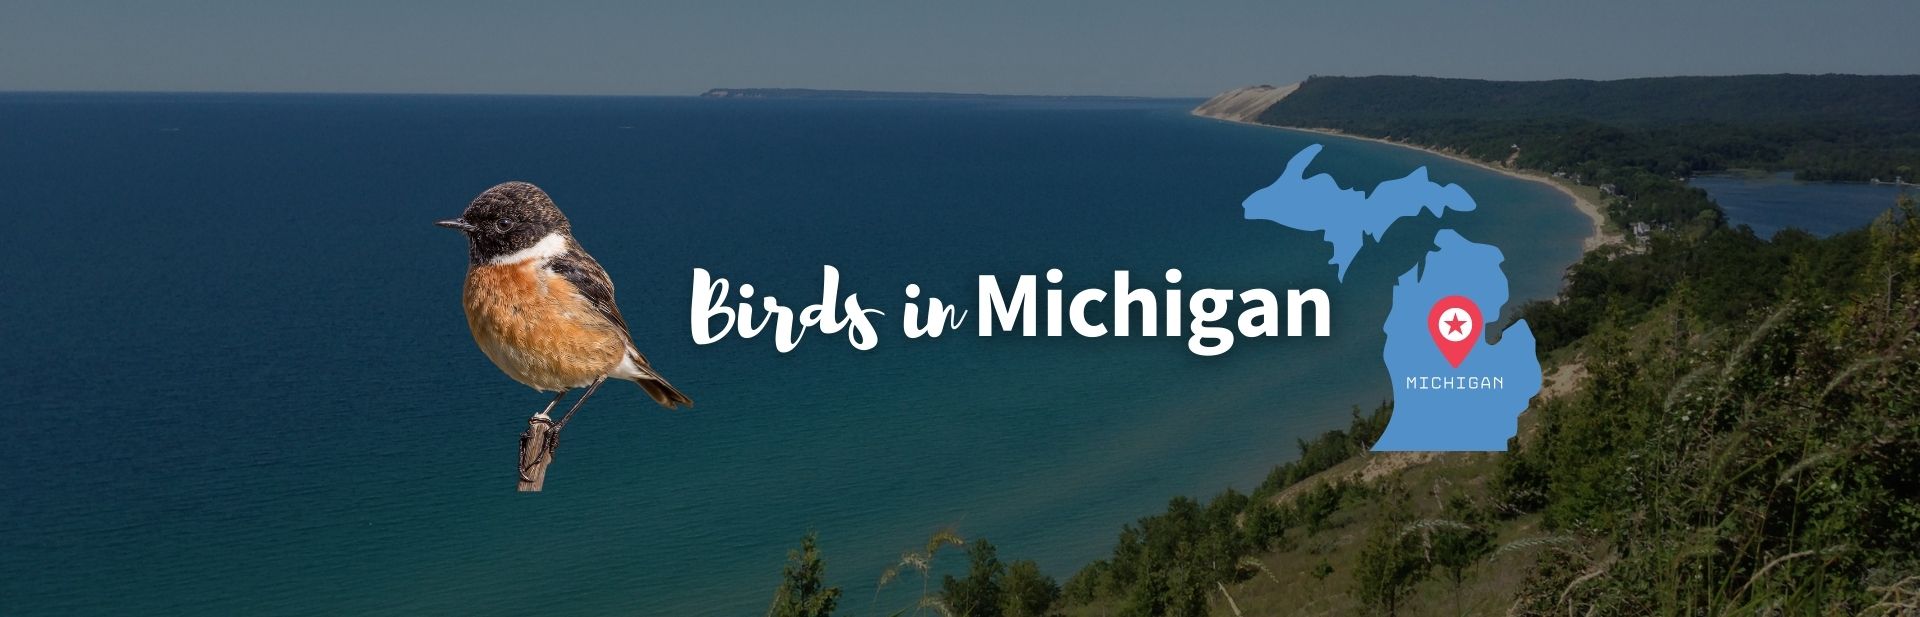 40 Wonderful Michigan Birds: ID Guide, Photos, Locations, and More!